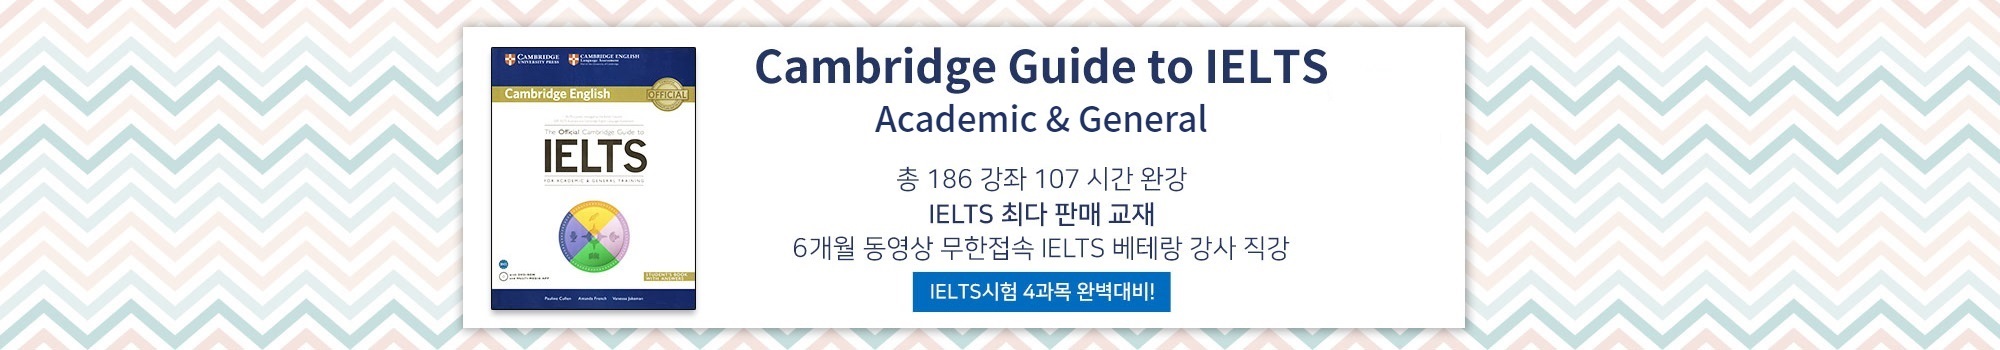 guide to IELTS 론칭